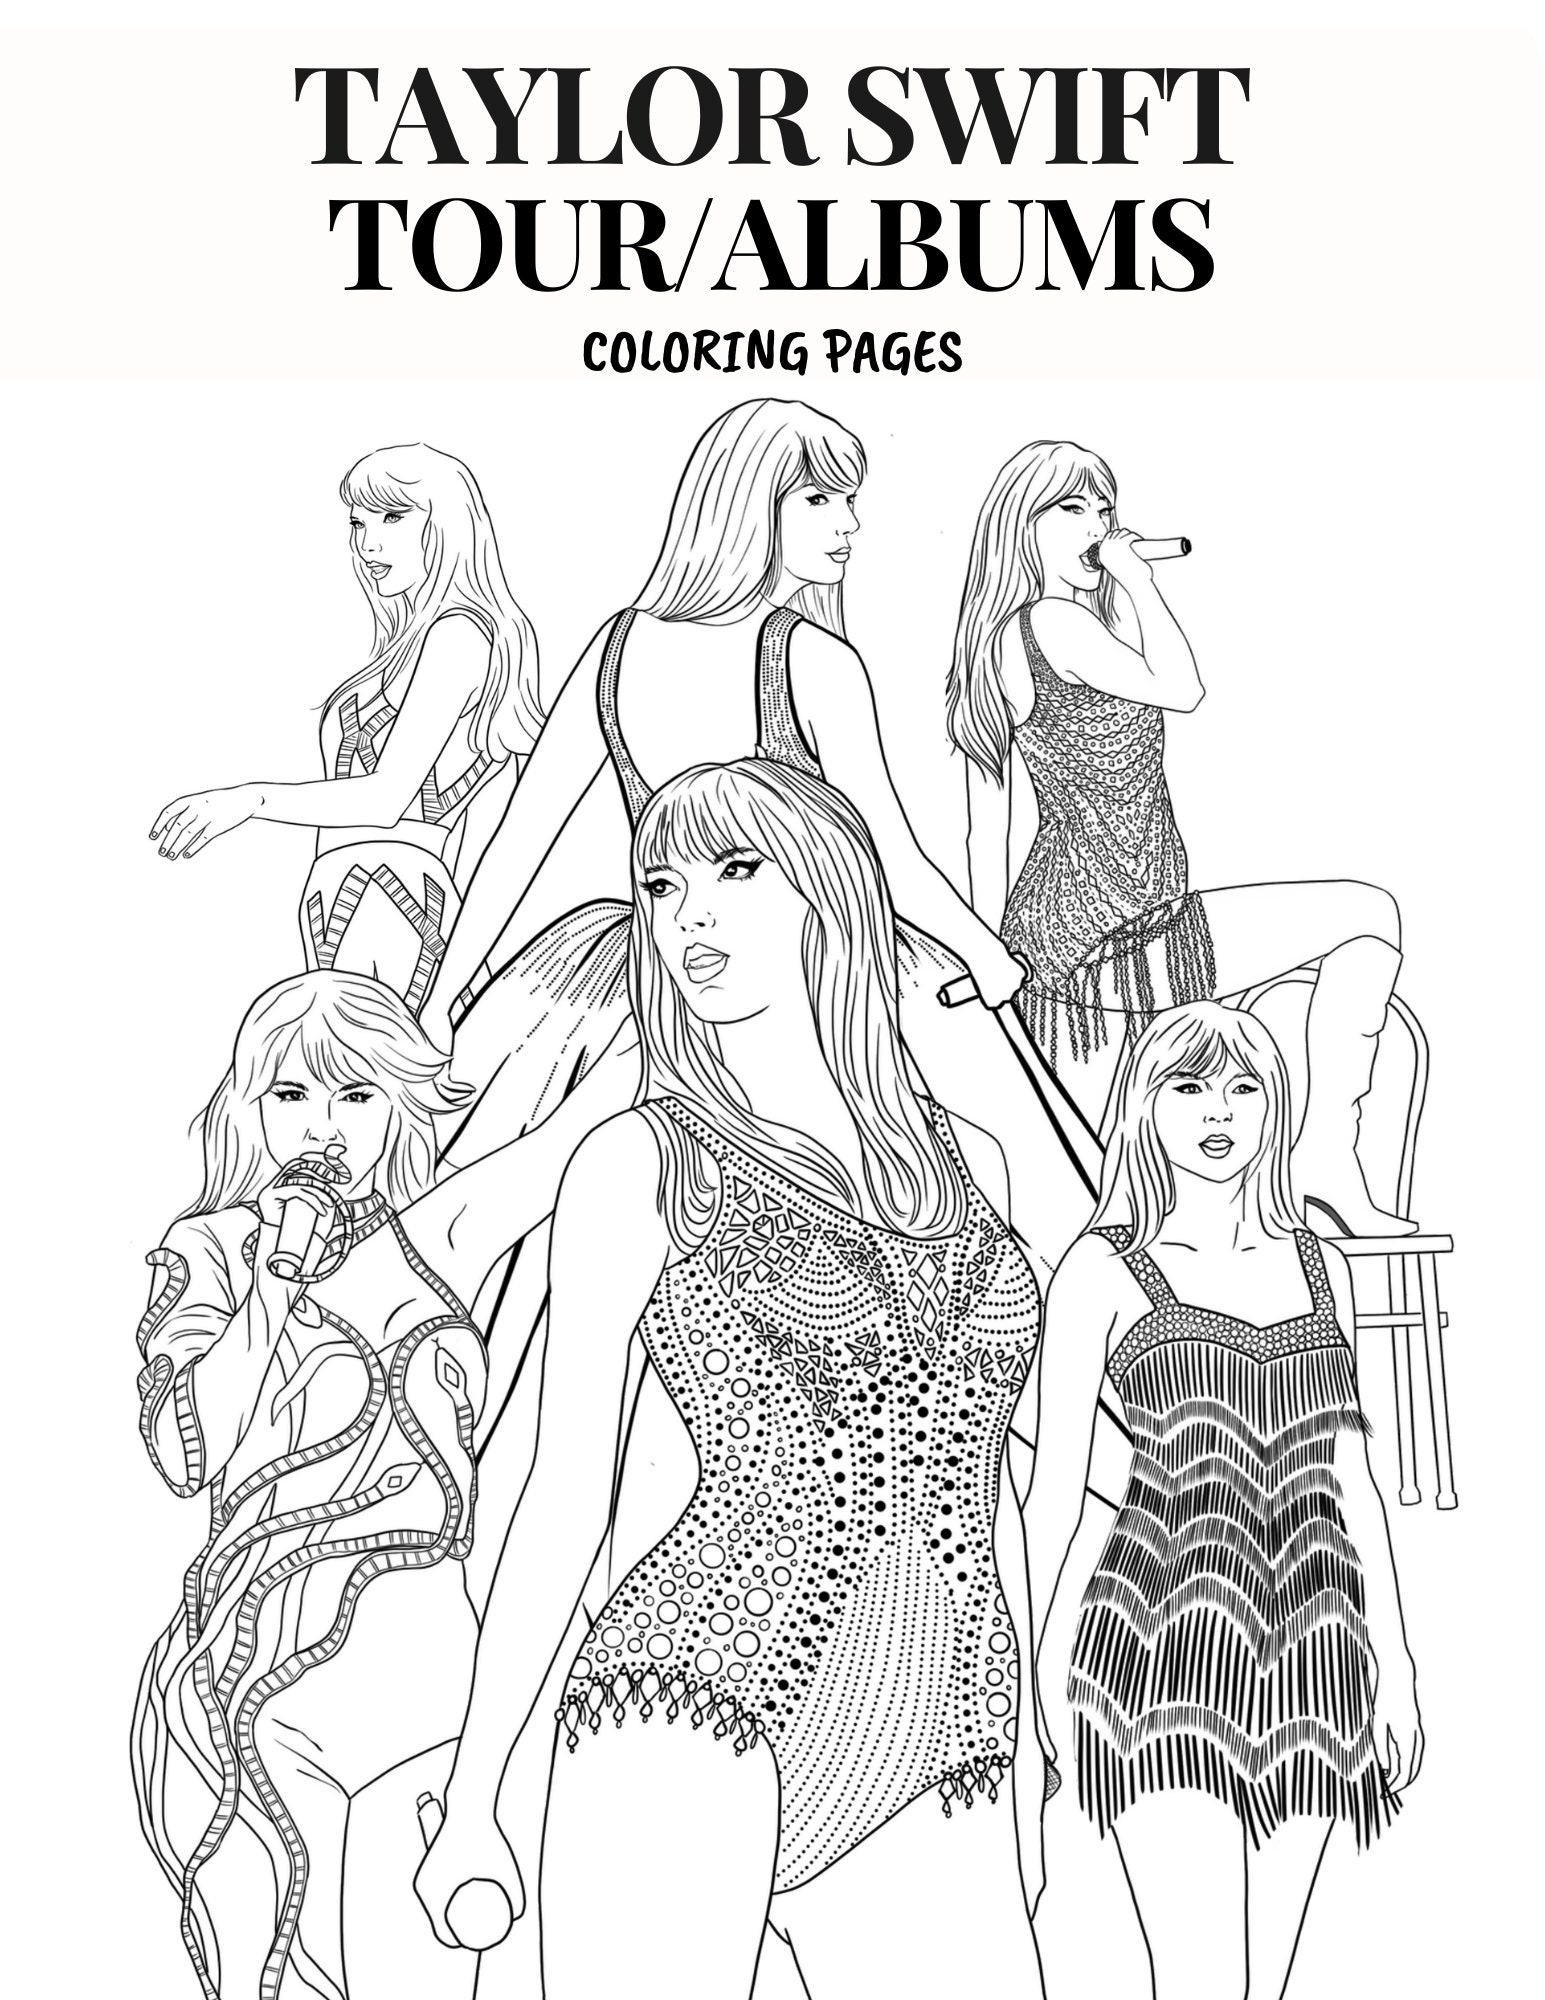 Taylor Swift Nominated For Best Album Coloring Page  People coloring  pages, Easy coloring pages, Coloring book pages